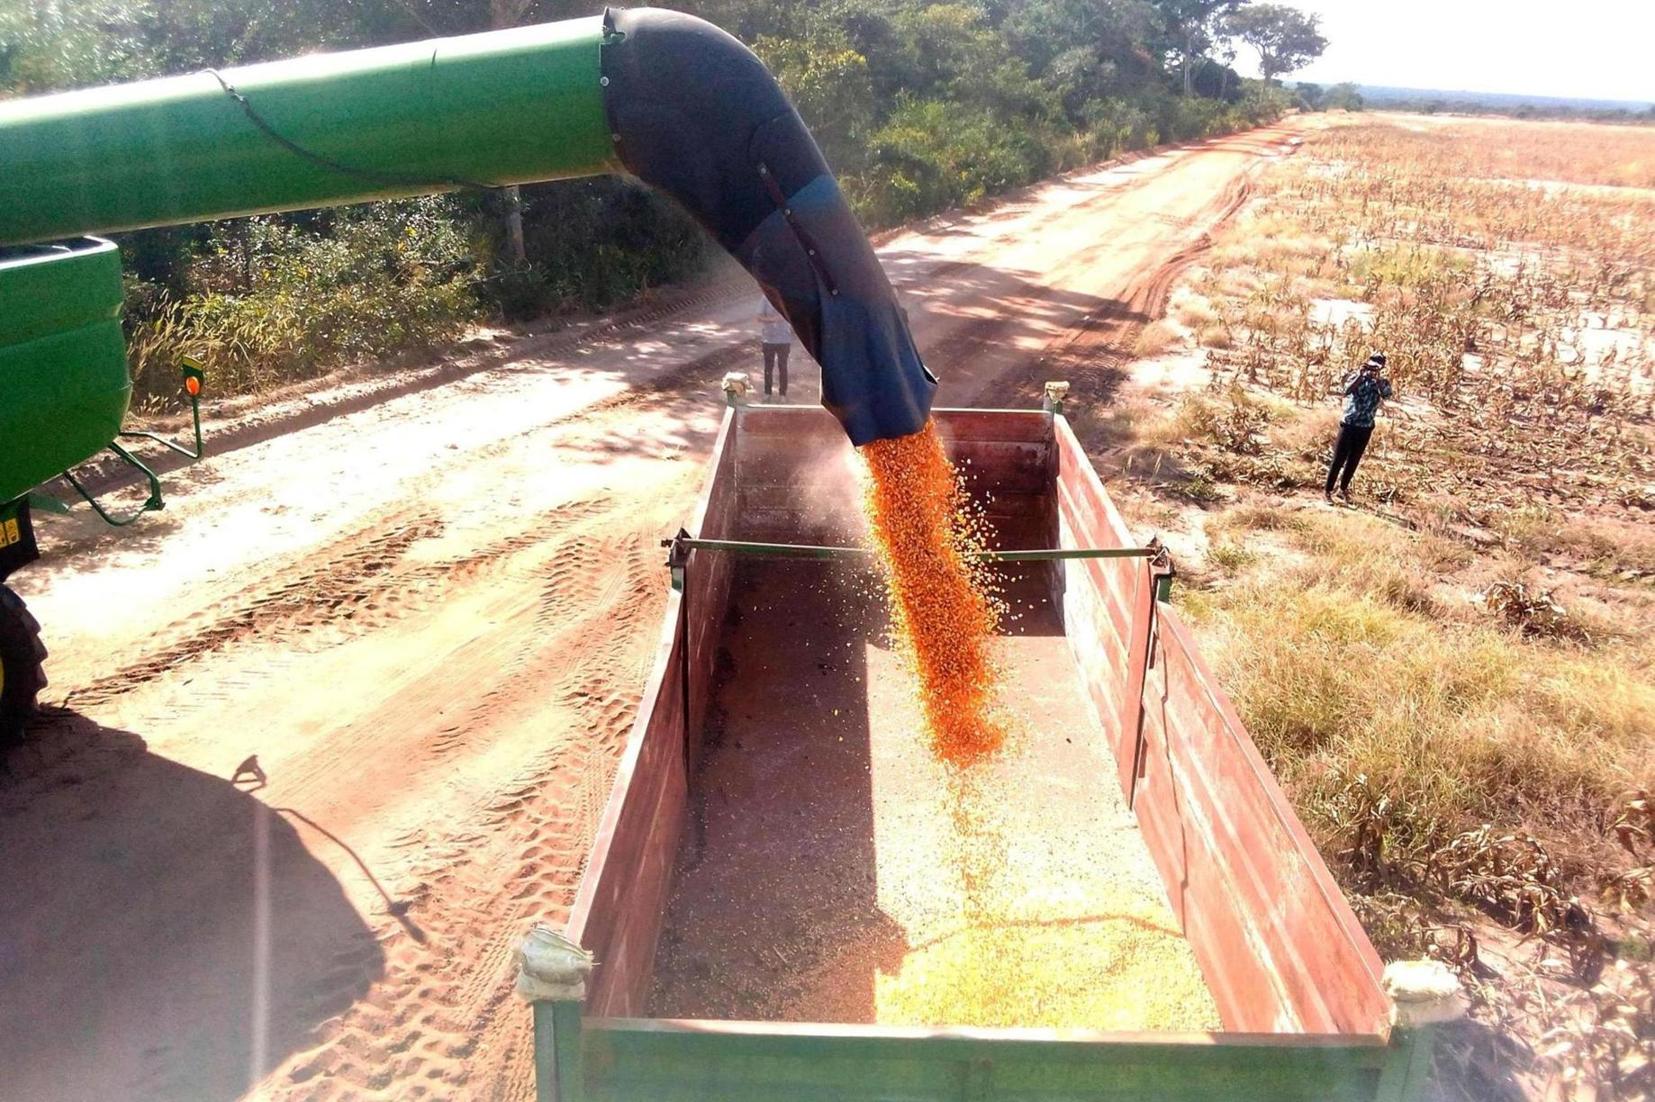 Planagrão will produce six million tons of cereals per year